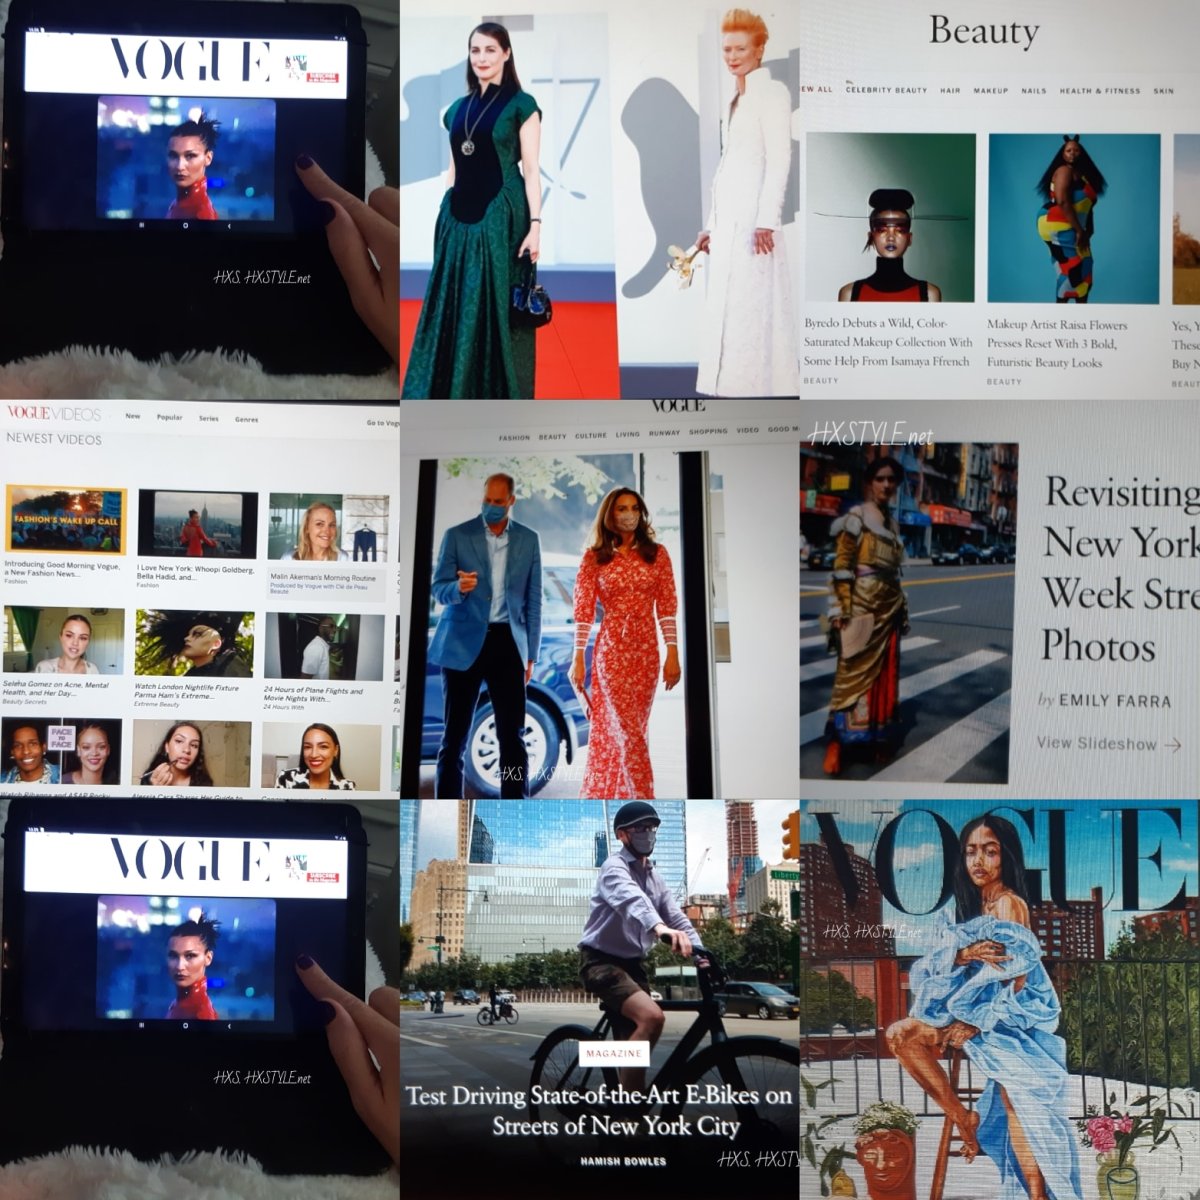 VOGUE NEWS&TRENDS. USA, New York…VOGUE Cover SEPTEMBER 2020. BEST FASHION DESIGN Venice Filmfestivals, VIDEOS, FASHION, Trendy Items to FALL Fashion…16.9.2020. Favourite 78 times. Favourite&Photos. Fashionblog&Lifestyle HXS. HXSTYLE.net